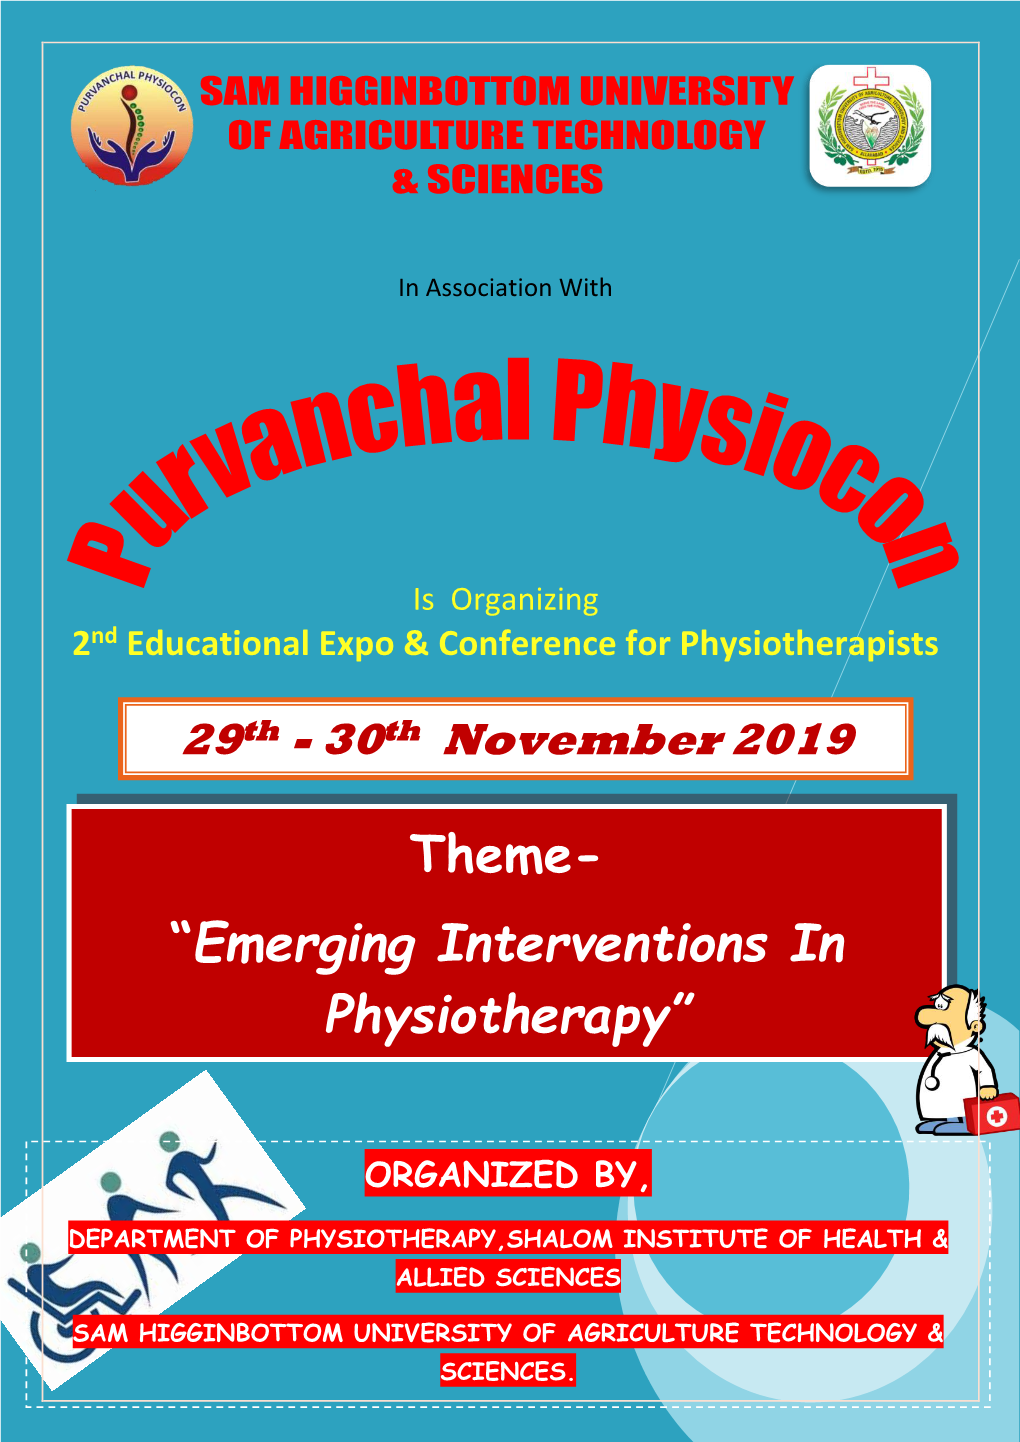 Emerging Interventions in Physiotherapy”